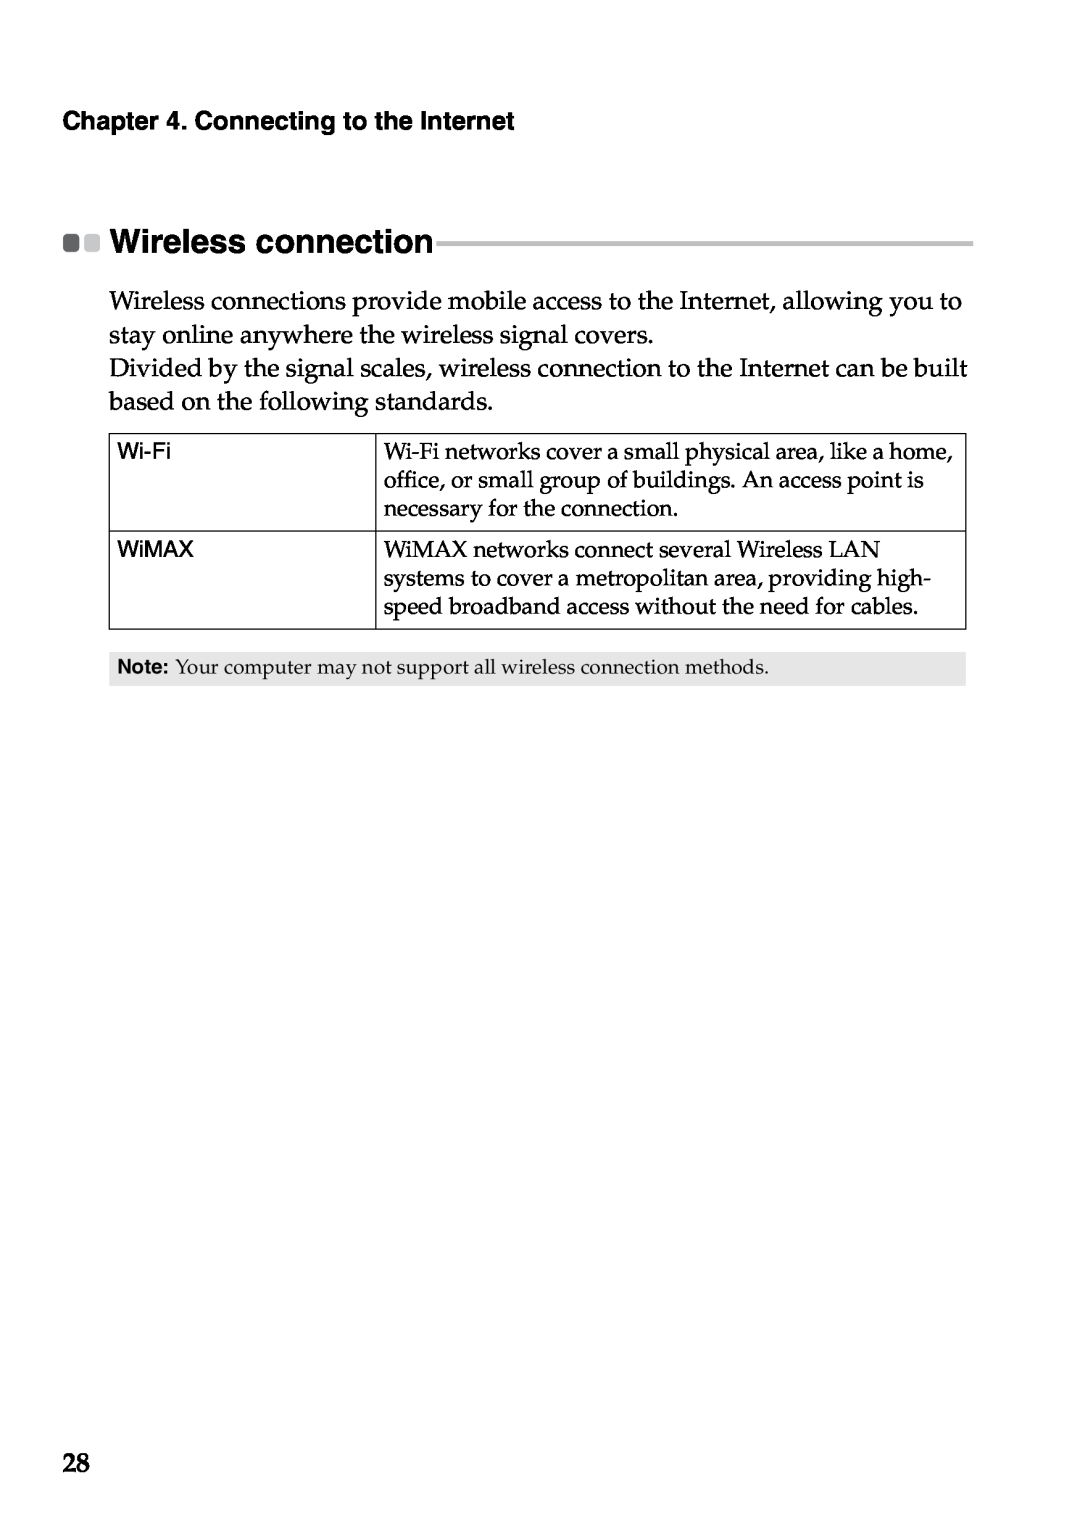 Lenovo S400U, 59RF0035 manual Wireless connection, Connecting to the Internet, Wi-Fi WiMAX 